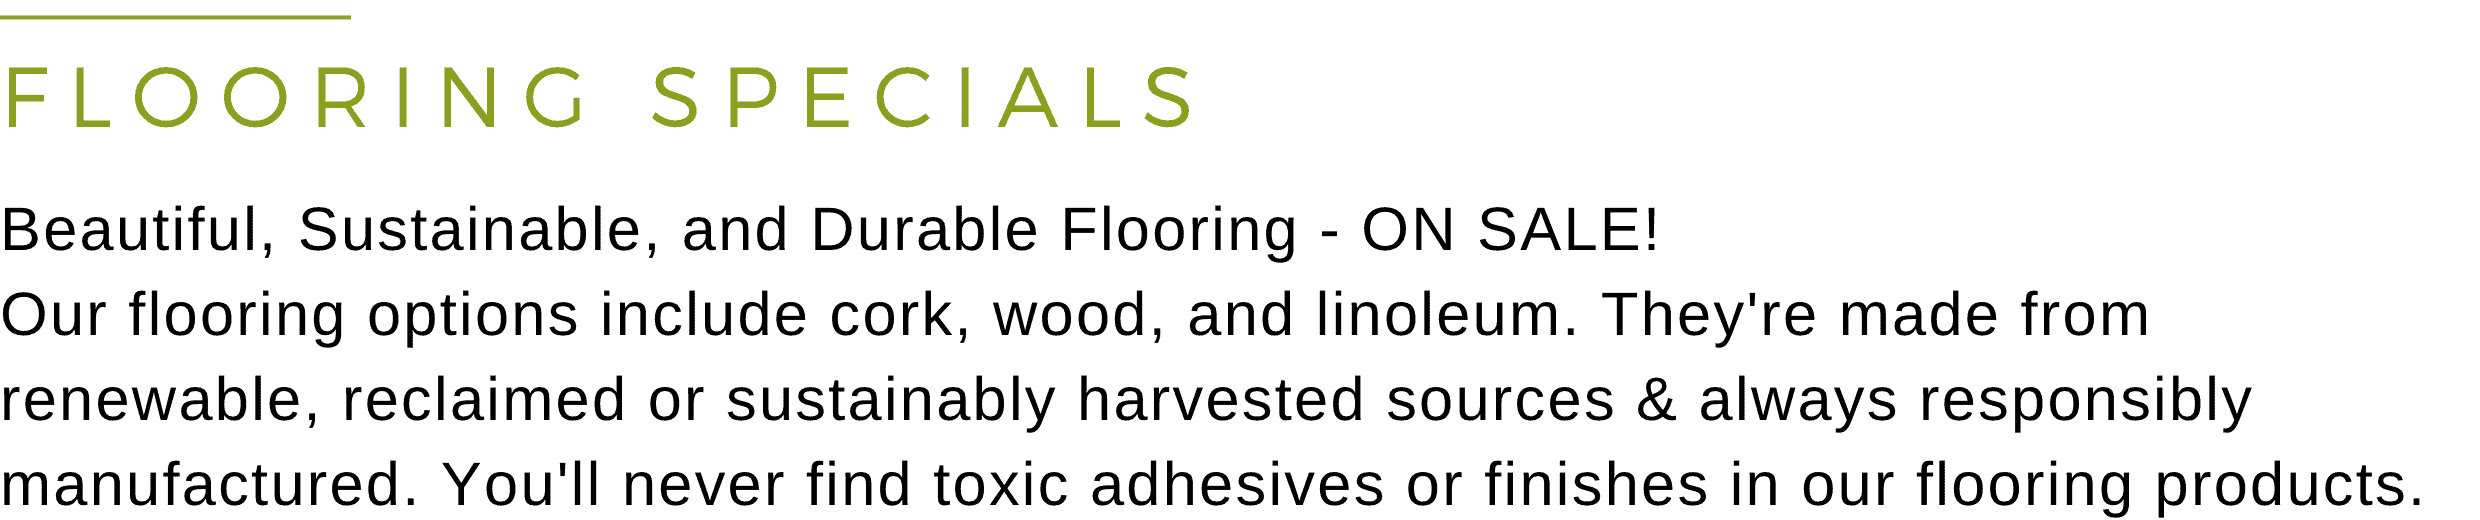 FLOORING SPECIALS - Beautiful, Sustainable, and Durable Flooring - ON SALE! Our flooring options include cork, wood, and linoleum. They're made from renewable, reclaimed, or sustainably harvested sources & always responsibly manufactured. You'll never find toxic adhesives or finishes in our flooring products.